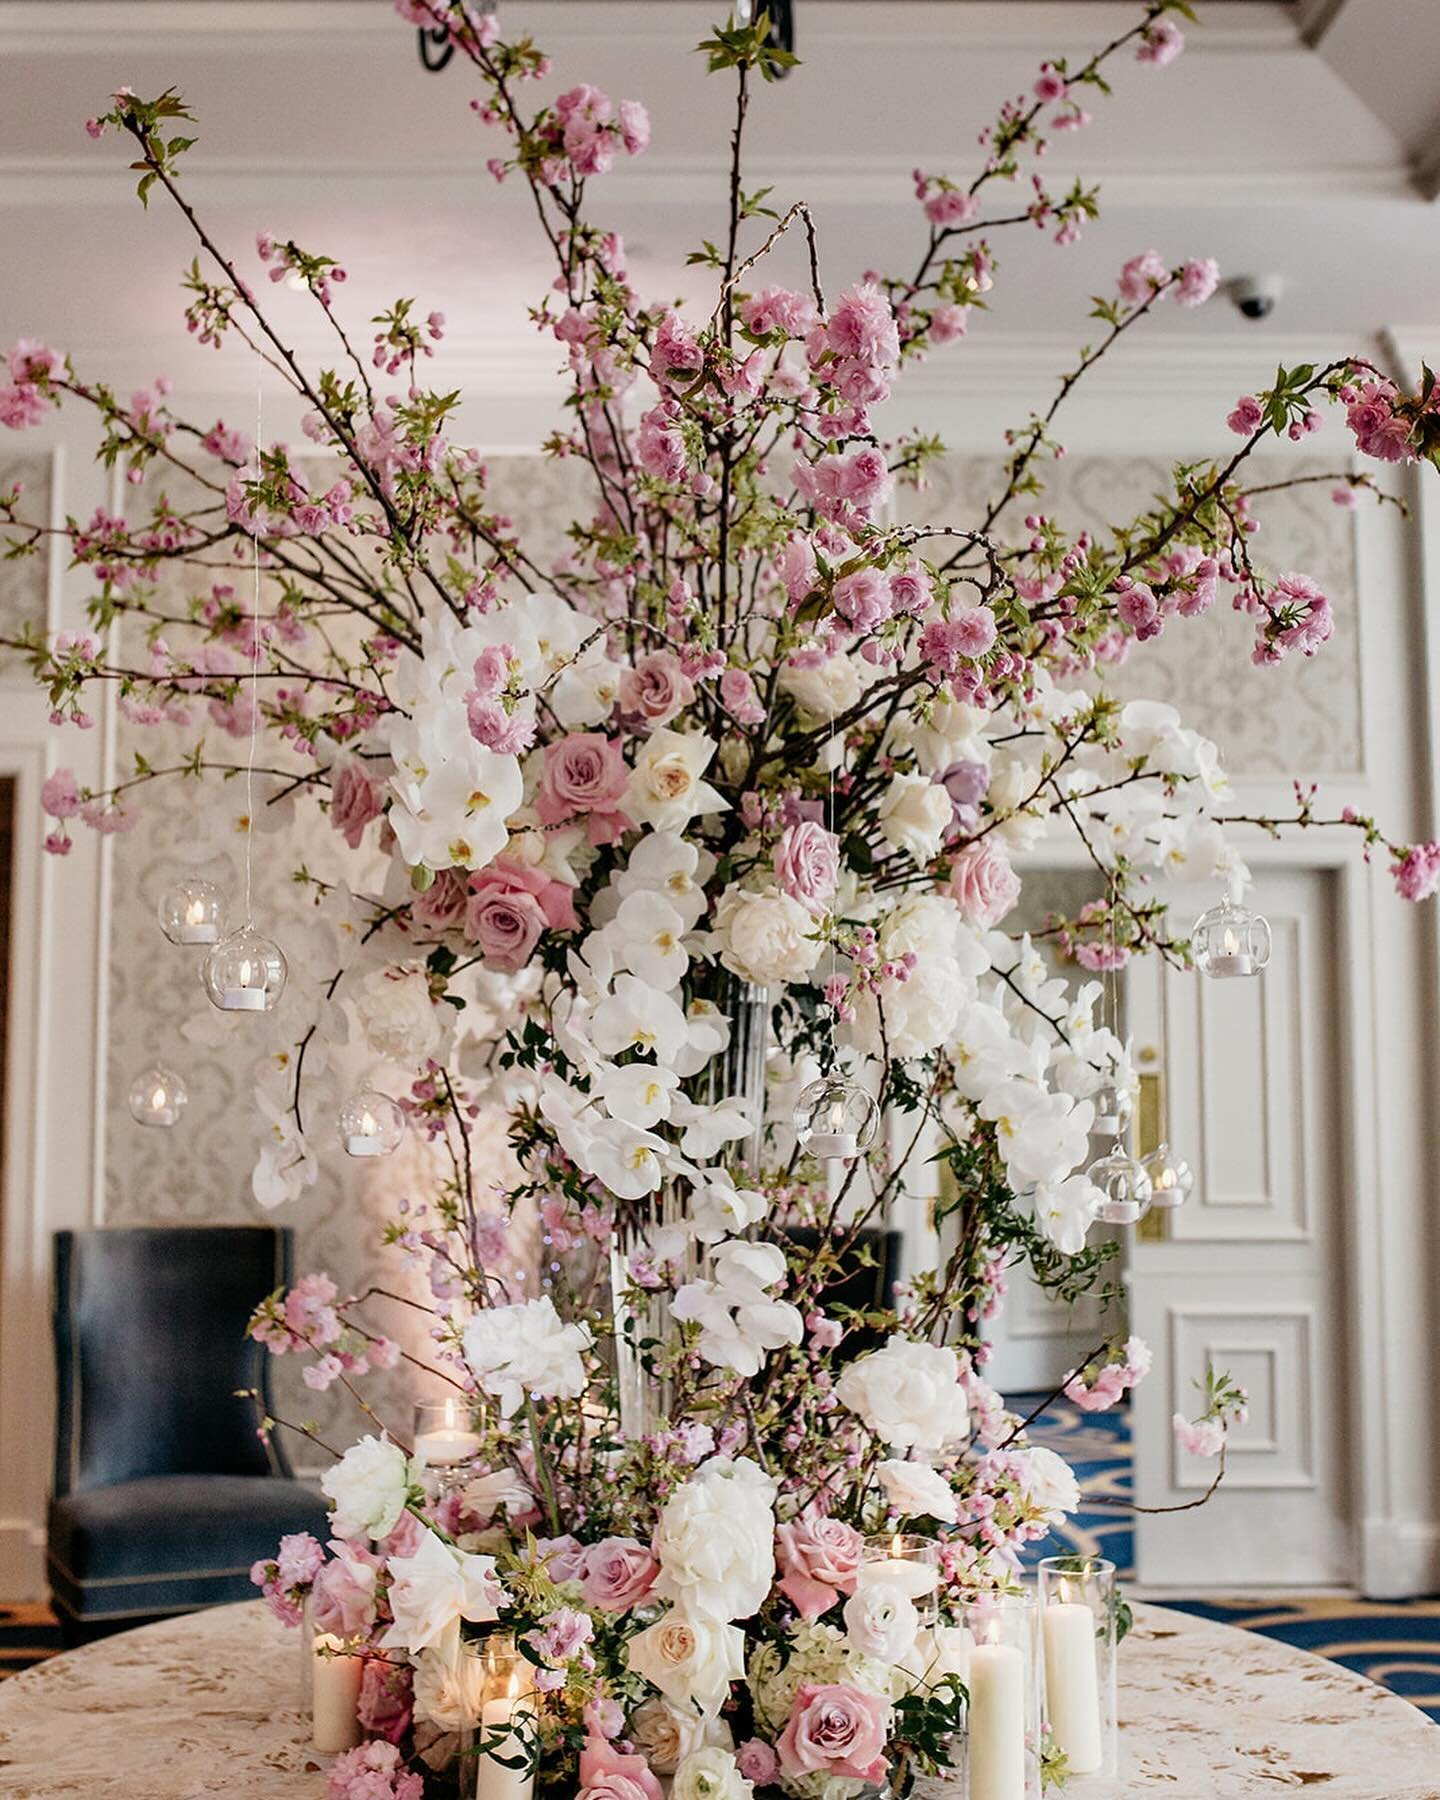 After taking a sabbatical from social media to focus on family, we&rsquo;re back and looking forward to the 2024 Wedding Season. But not before sharing some of our 2023 Weddings. Starting with this Springtime Stunner. Thanks to these cherry blossoms 